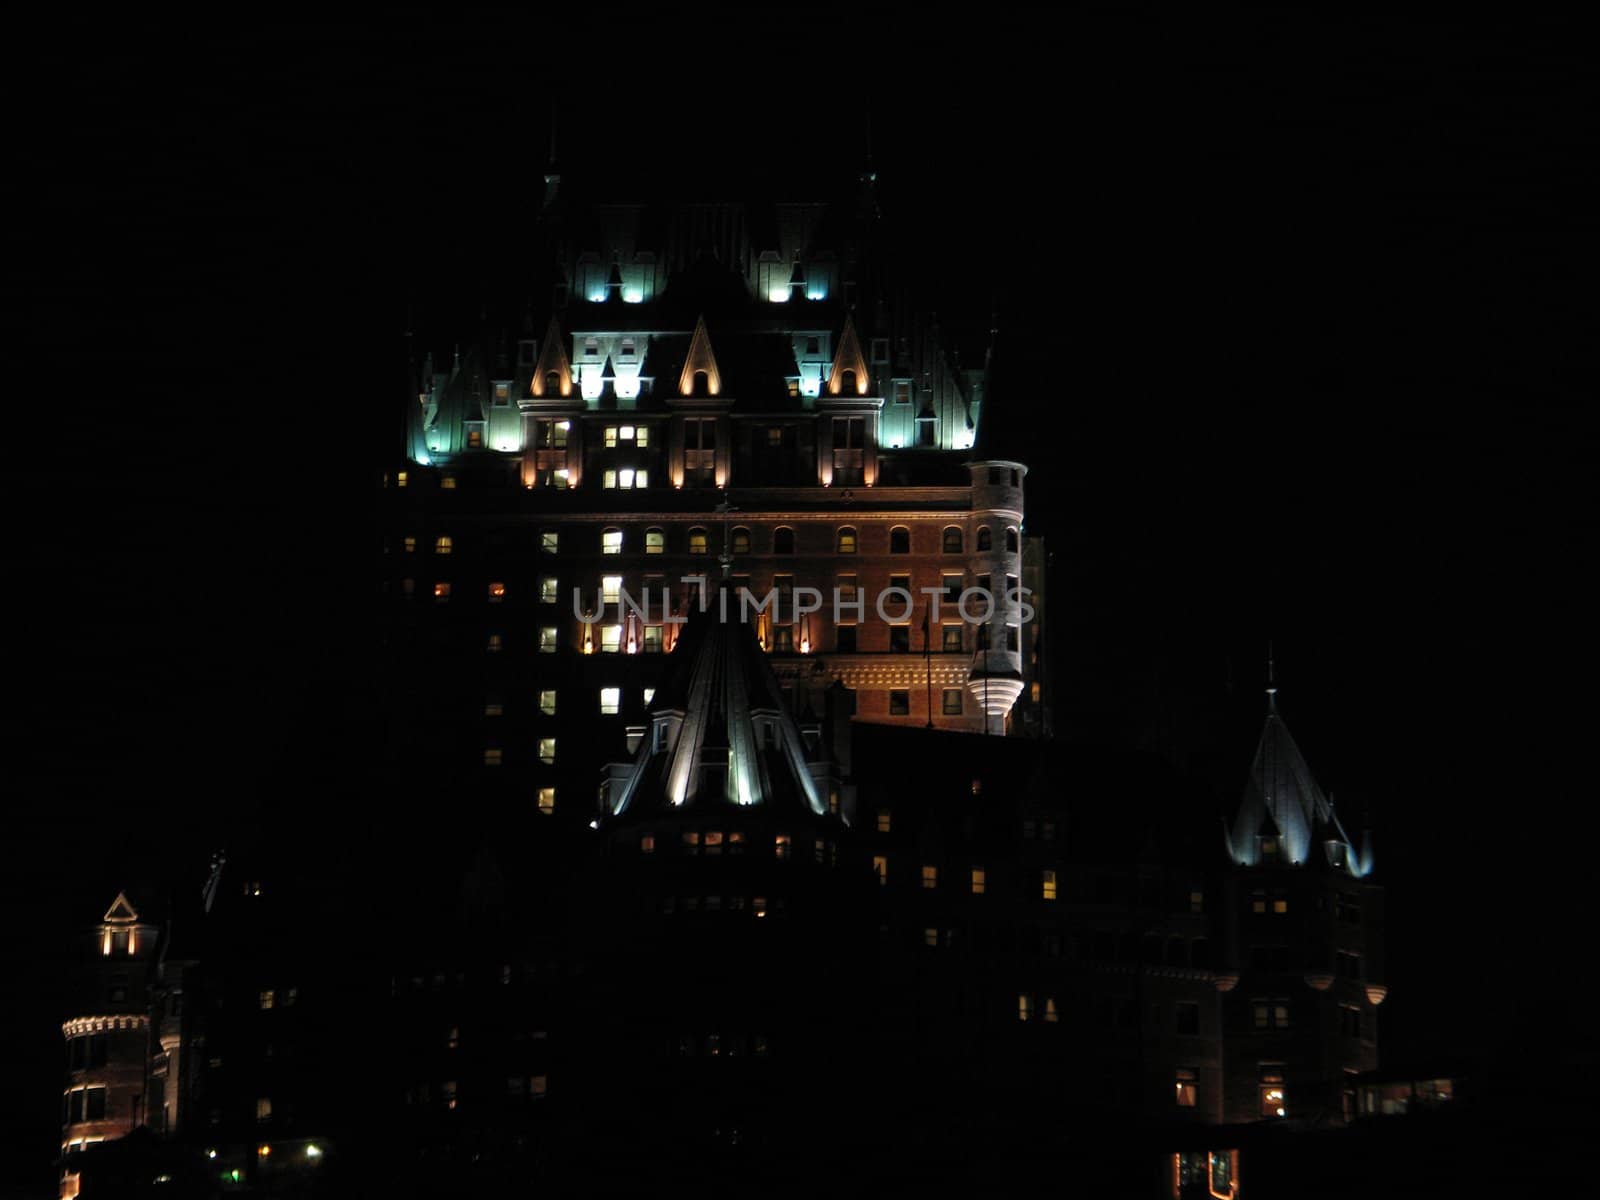 chateau frontenac, quebec, canada, at night by mmm